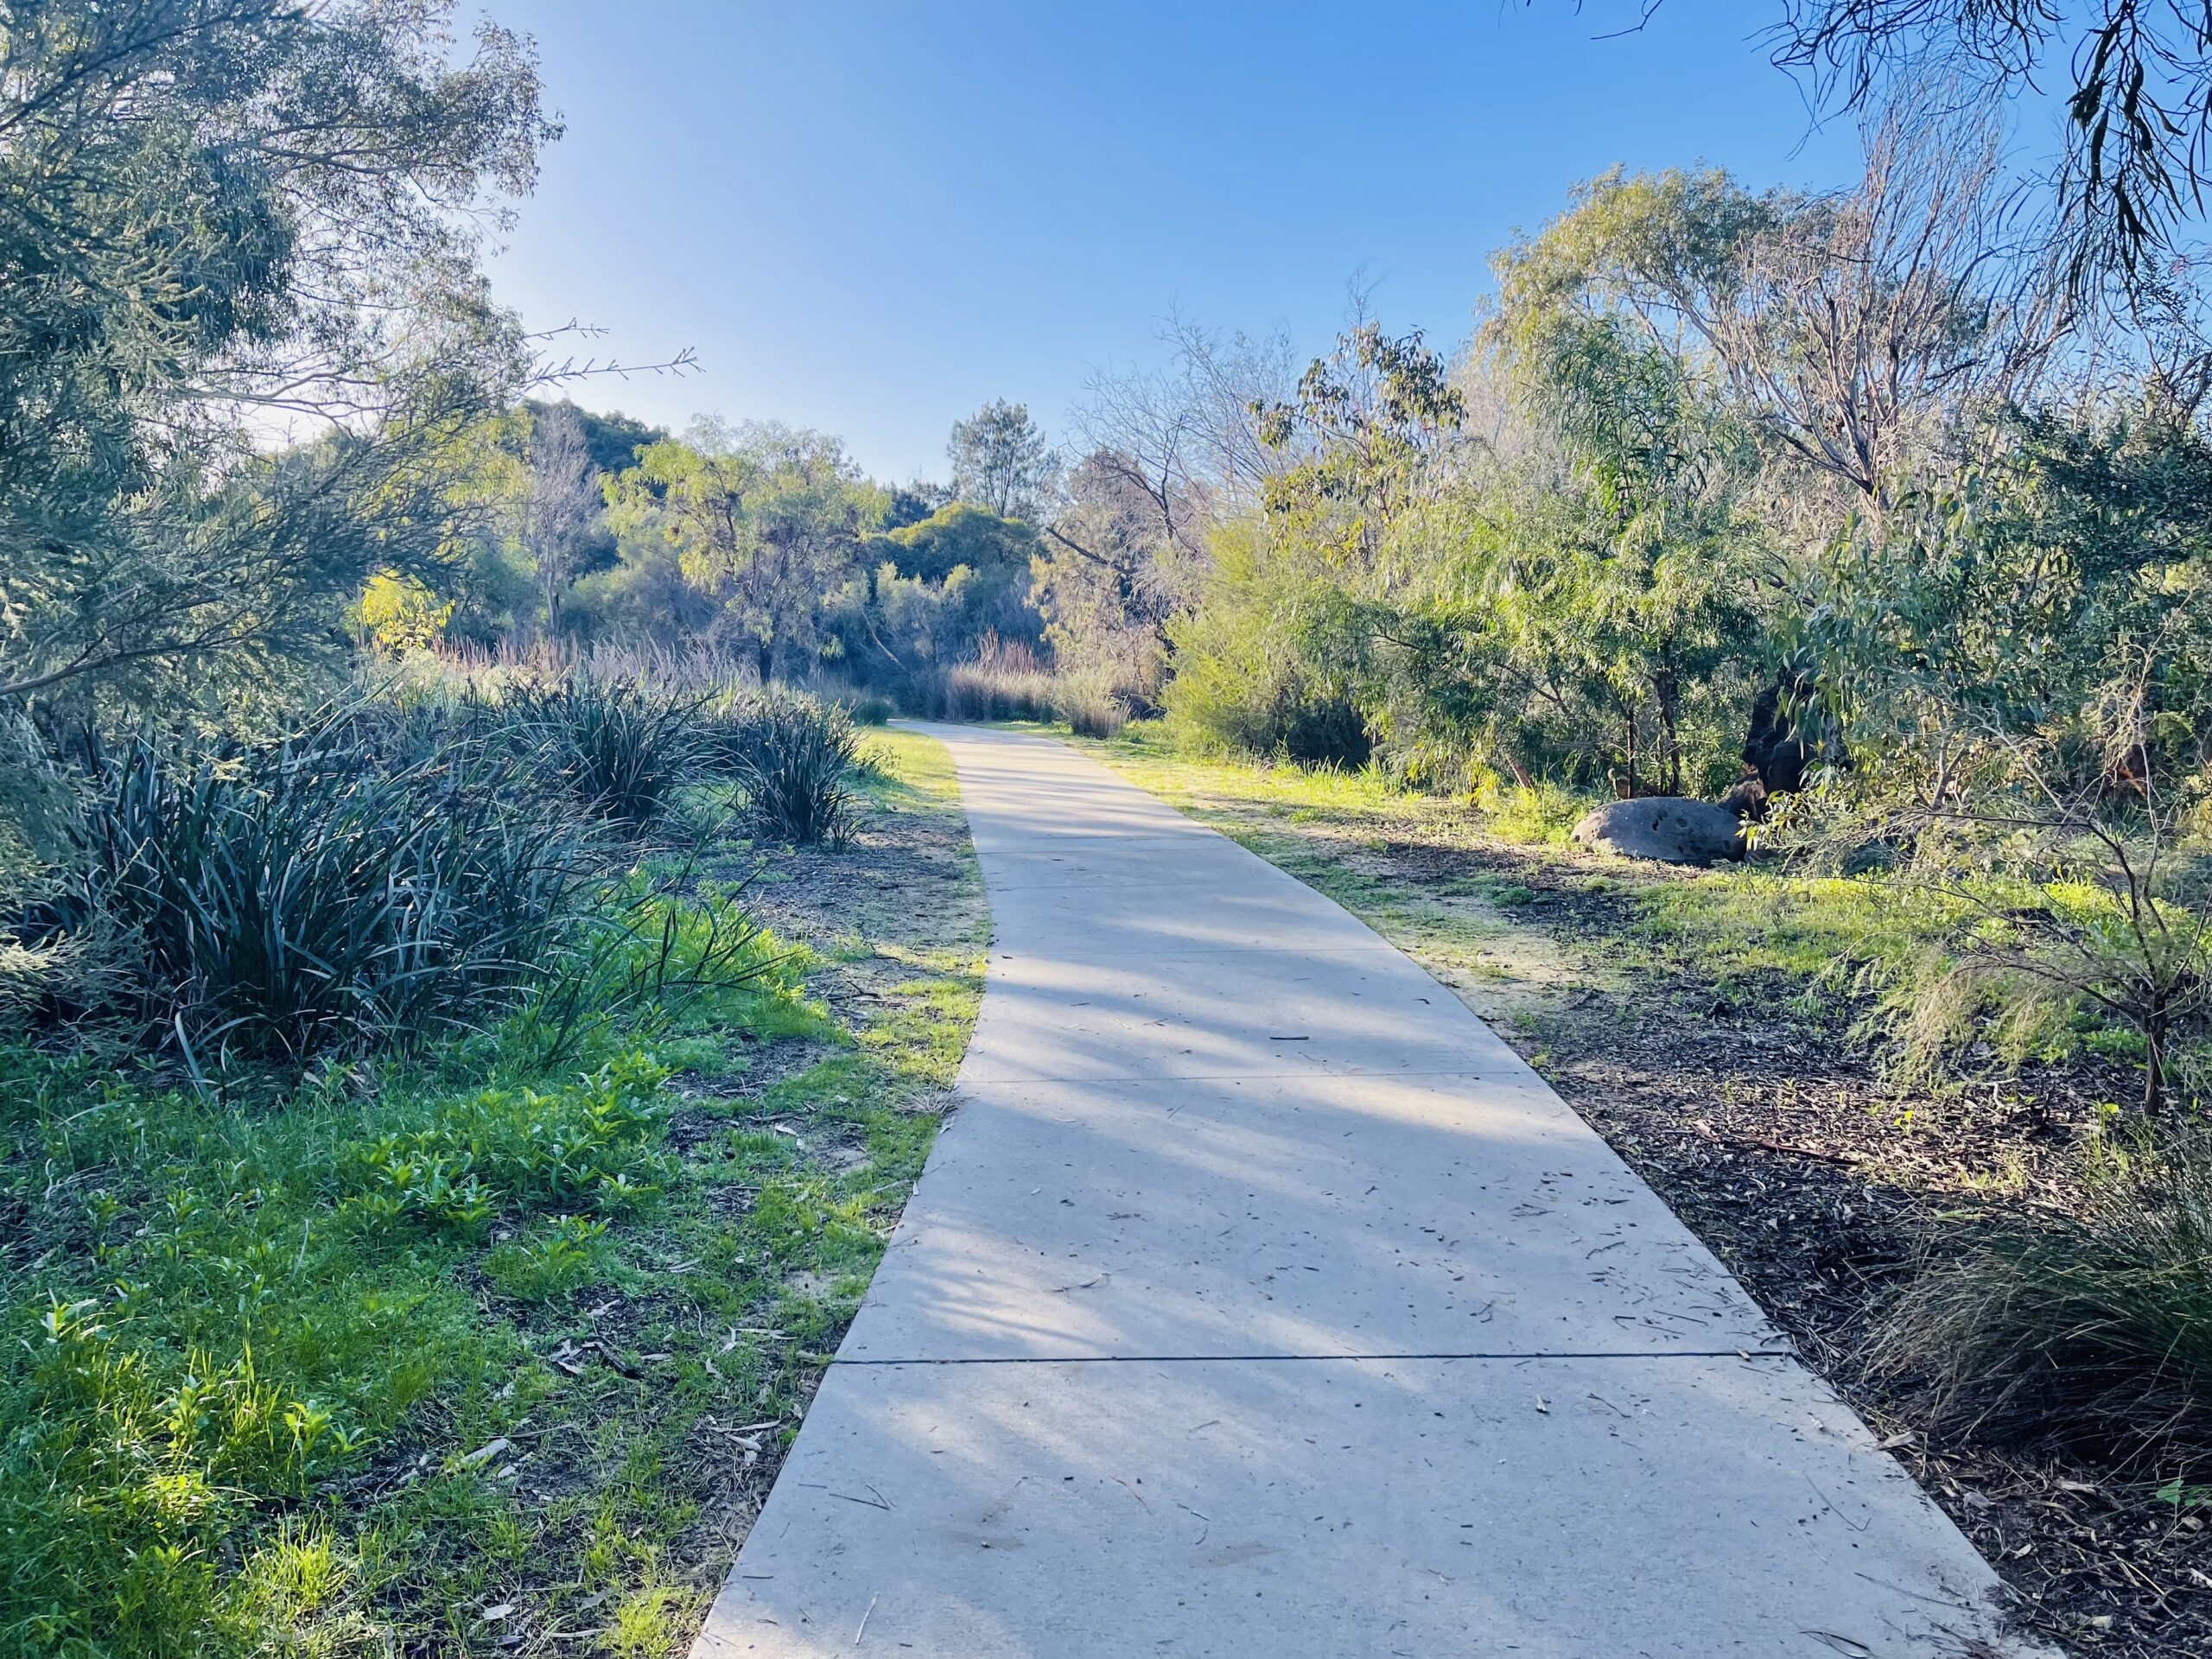 A photo of a cement path, which runs between bushes, shrubs and trees of different shades of green. The sky above is clear and blue.